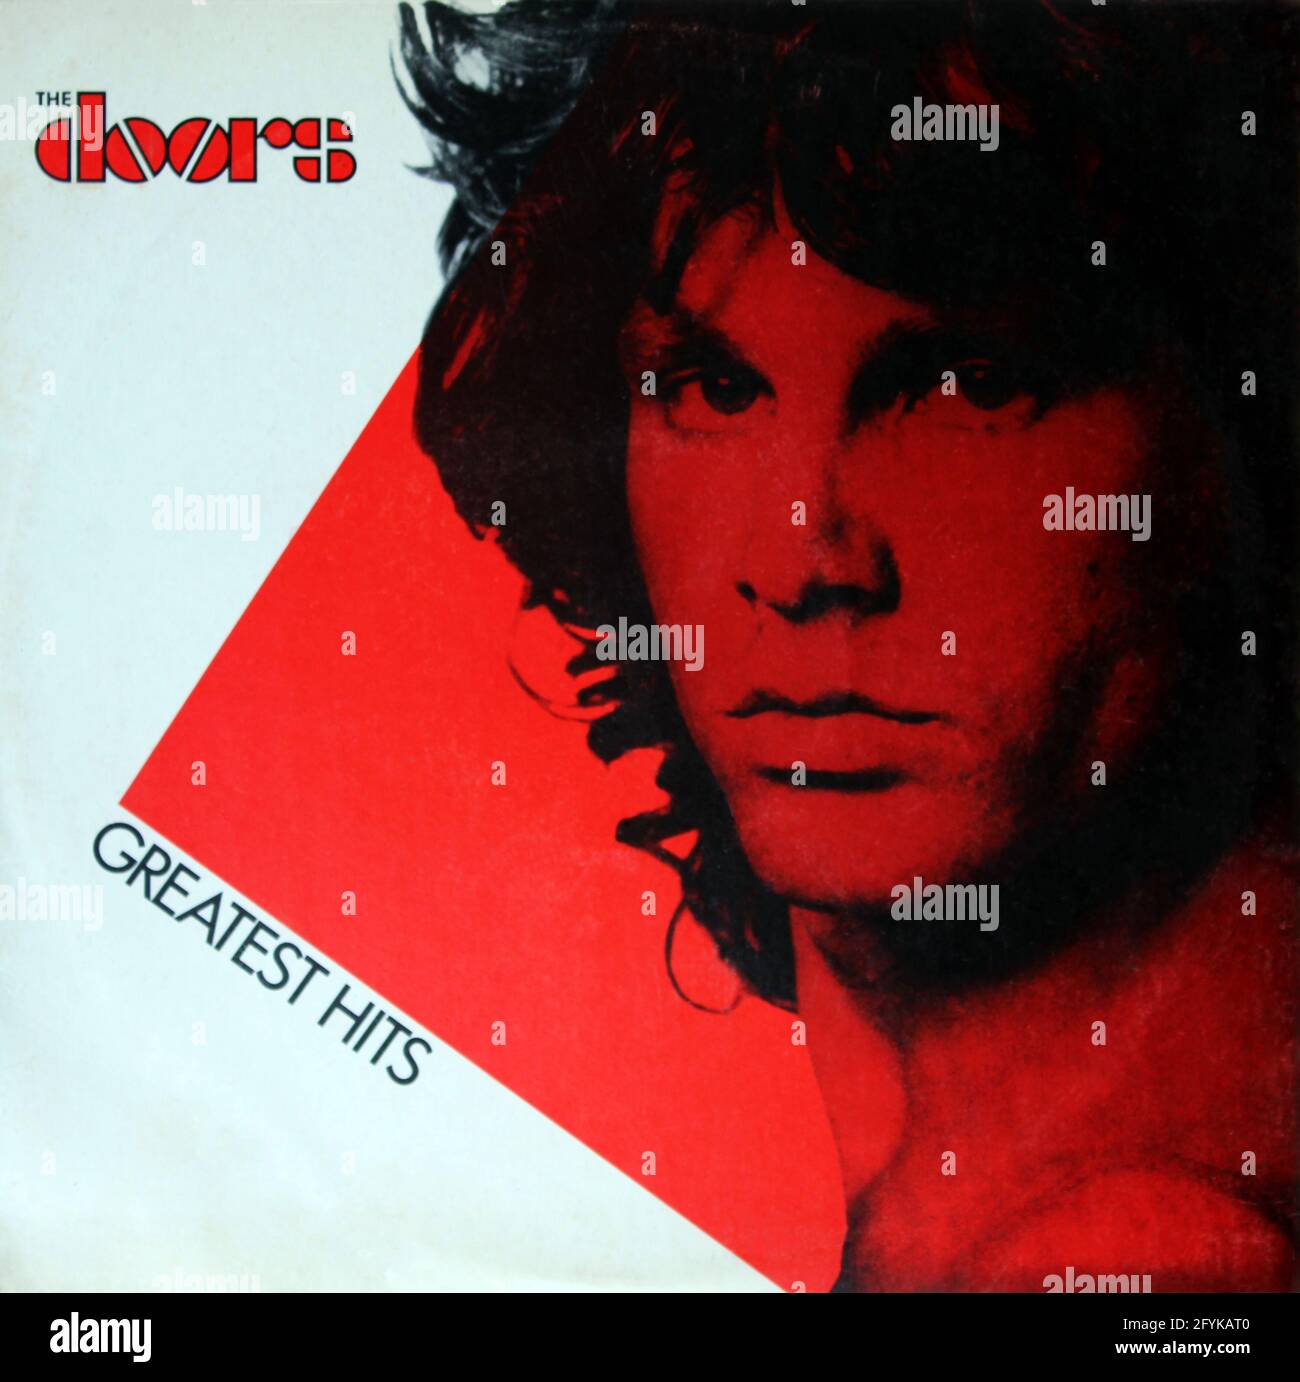 The Doors: 1980. LP front cover: Greatest Hits Stock Photo